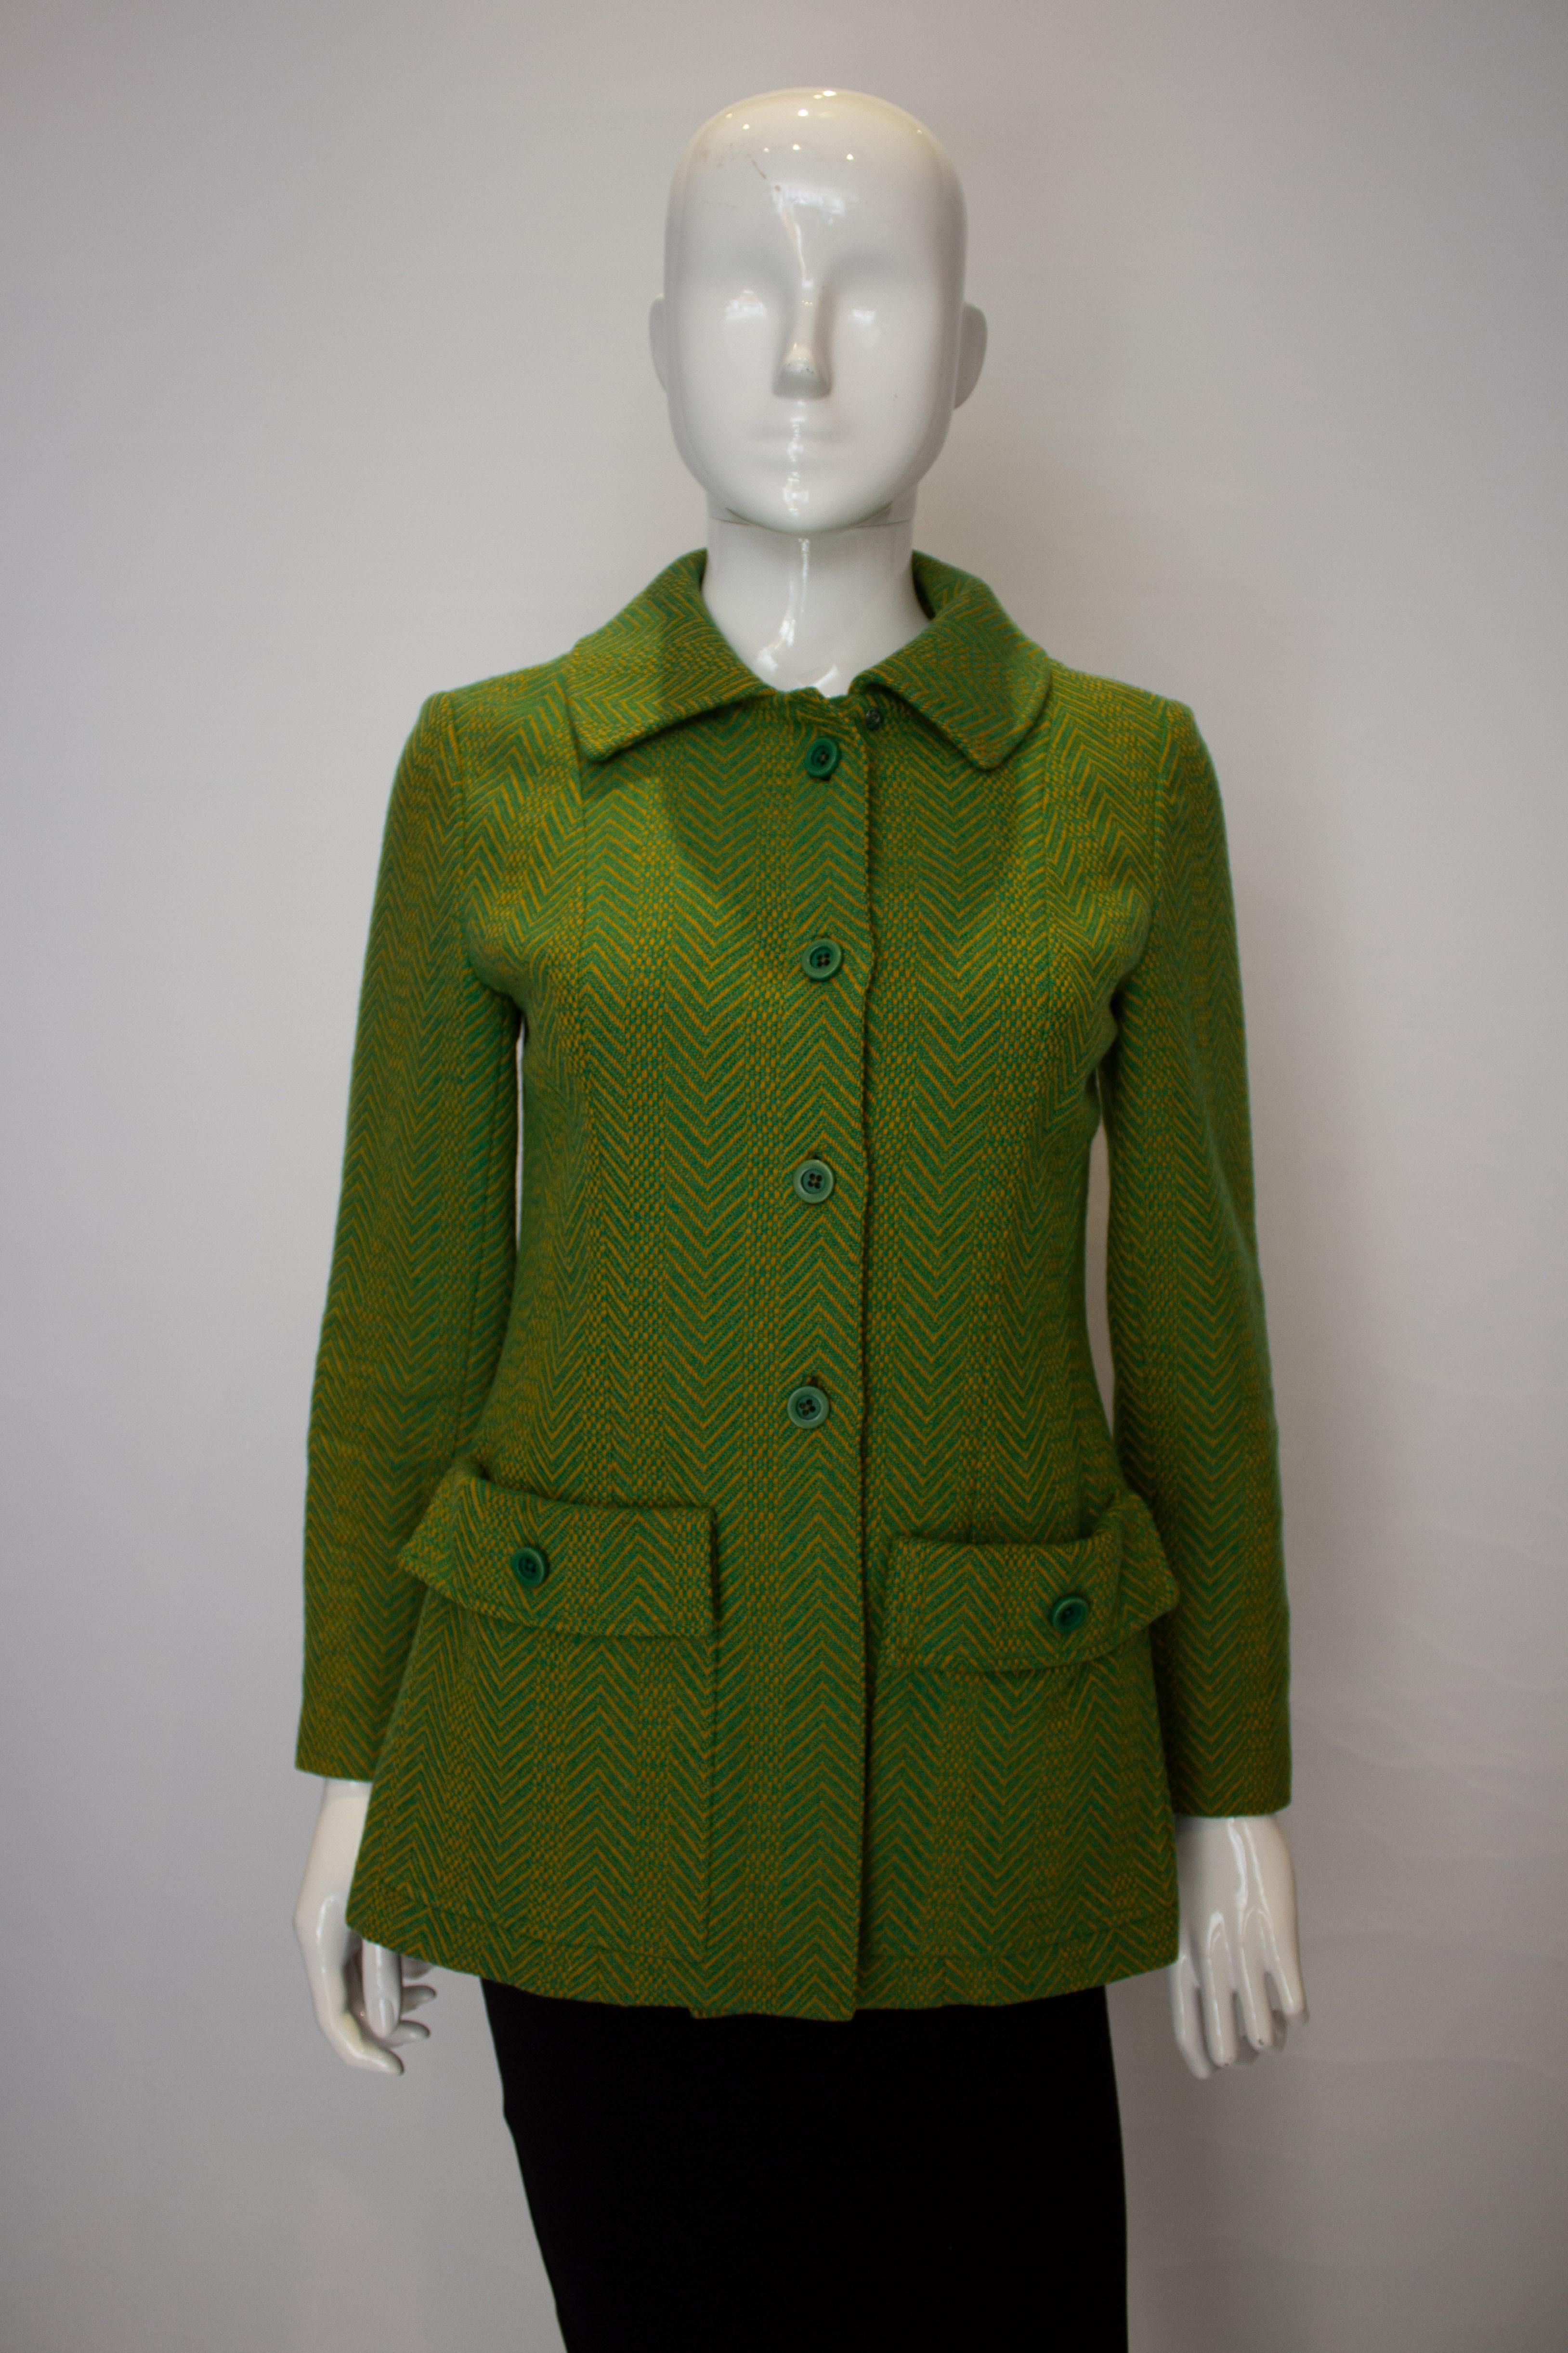 A fun vintage  jacket by Marcus boutique , London. The jacket is an interesting mix of colours and weaves. It is unlined and has a four button opening and two pouch pockets at the front.